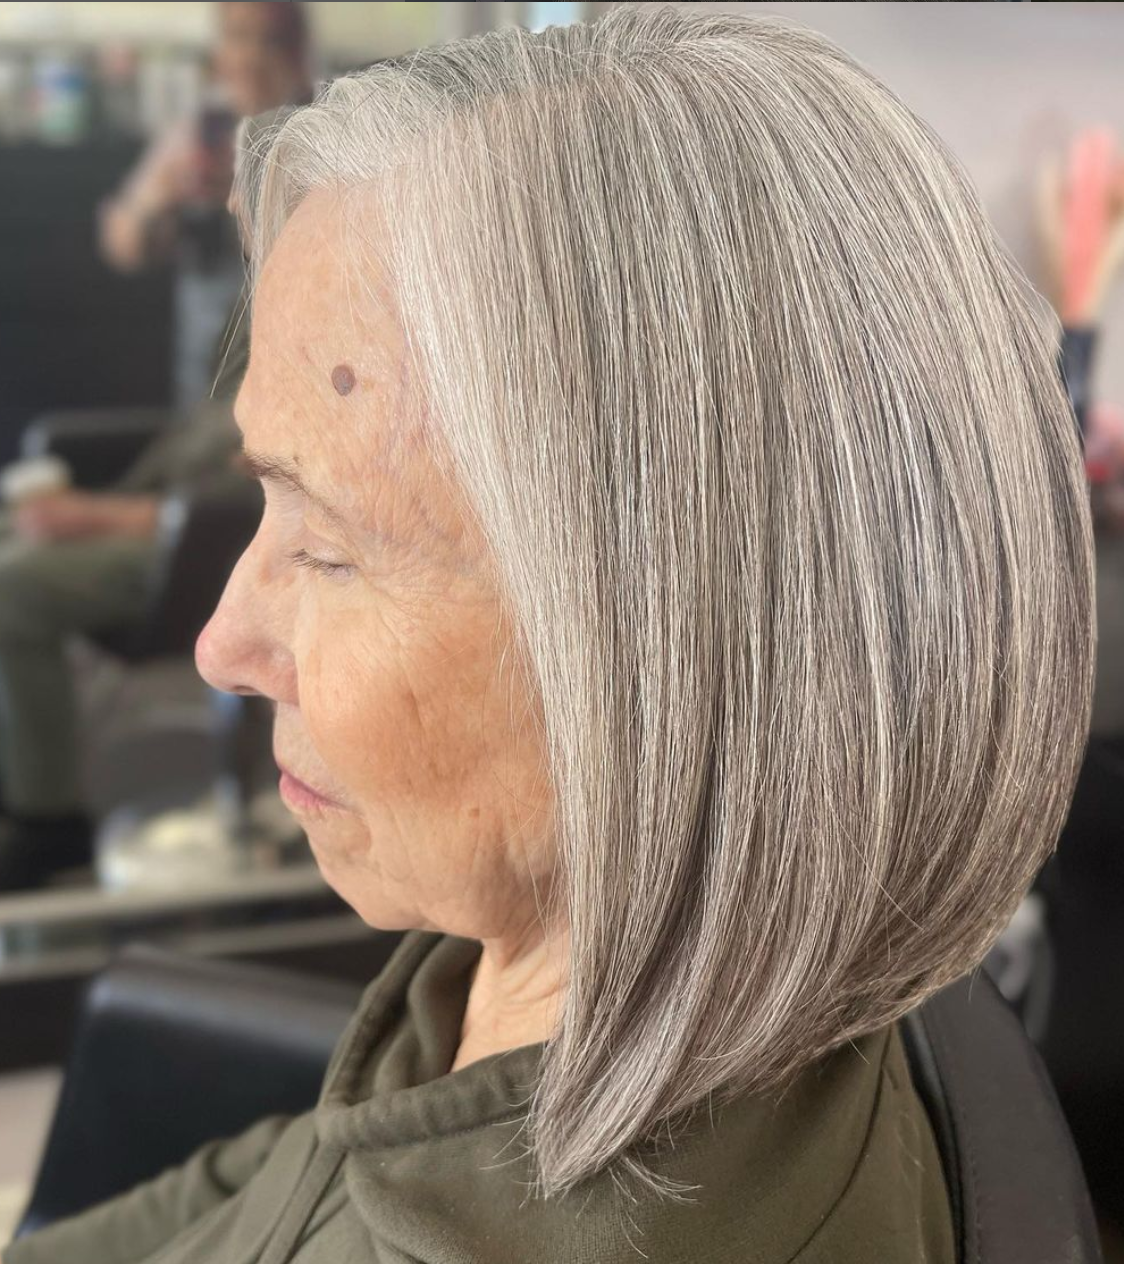 The side profile of a woman with a gray bob haircut.